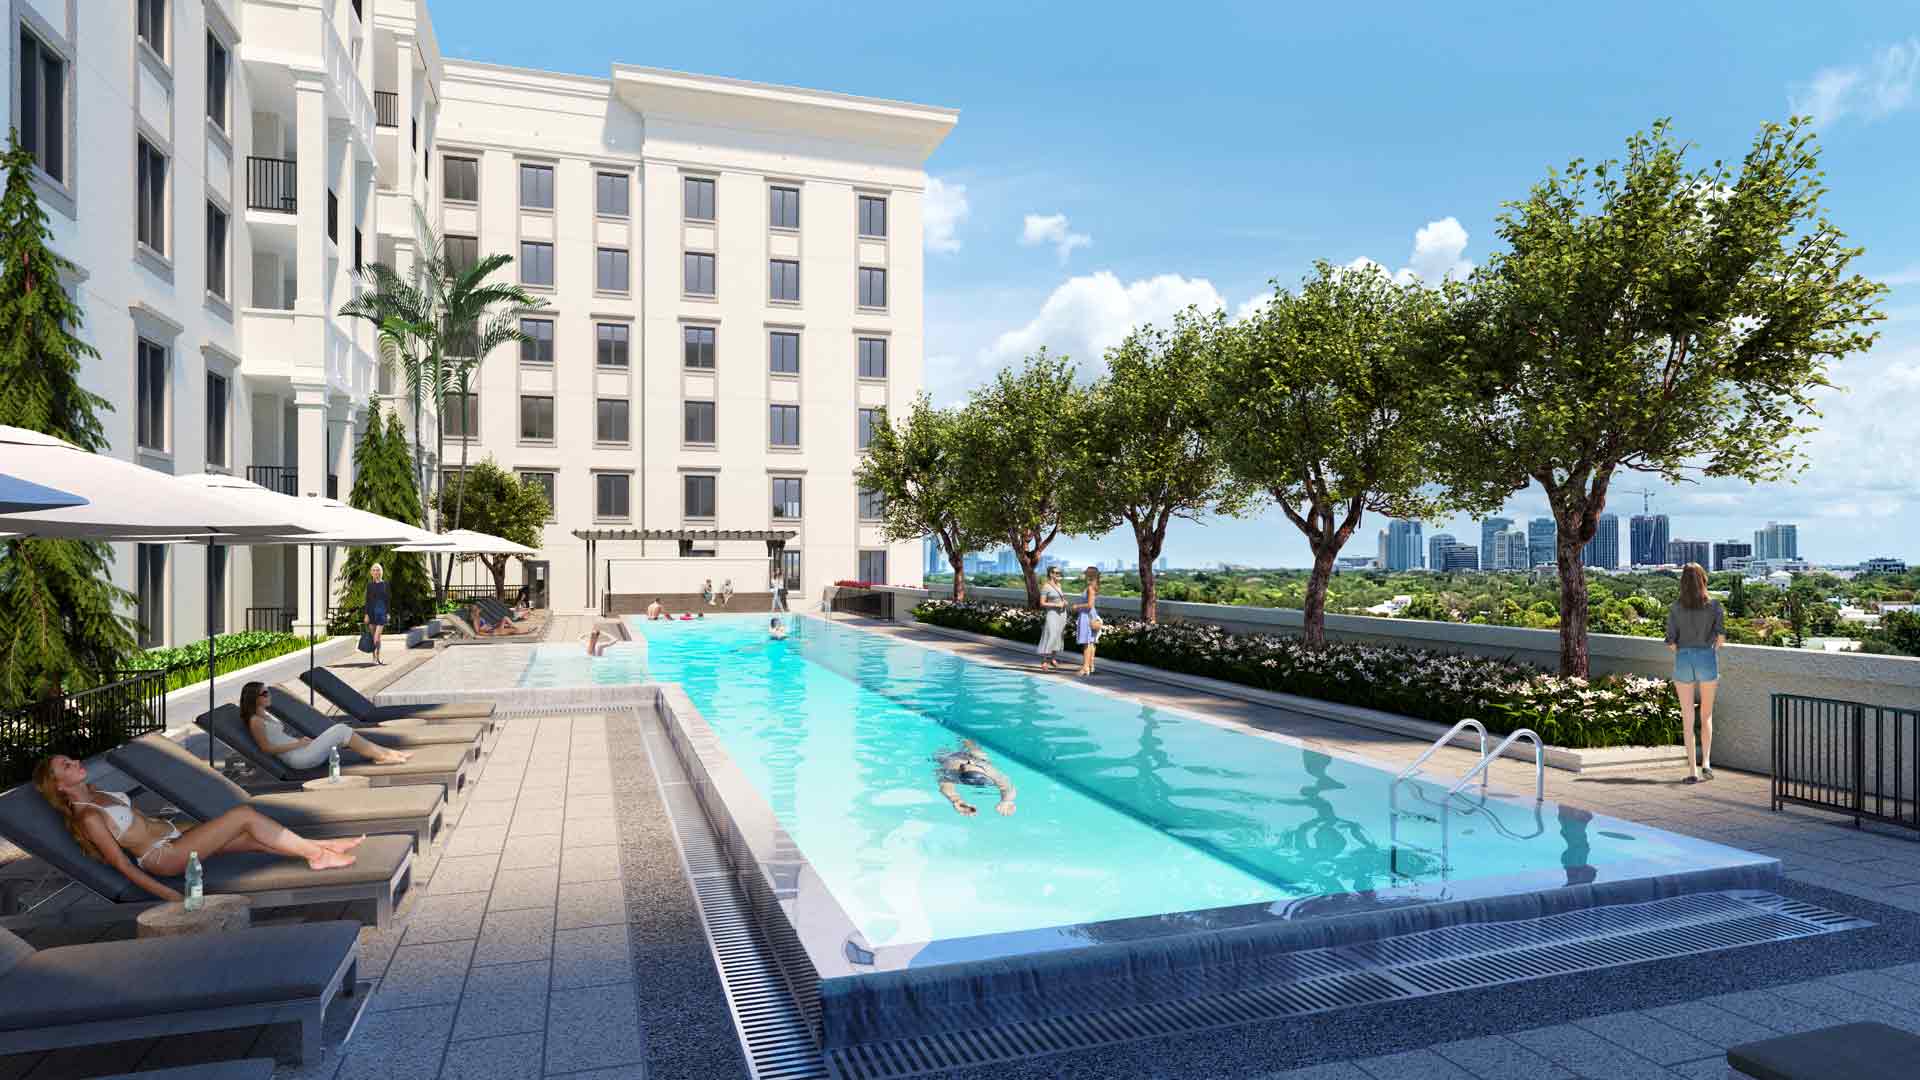 People enjoy a luxurious lap pool and lounge chairs on a life time living rooftop